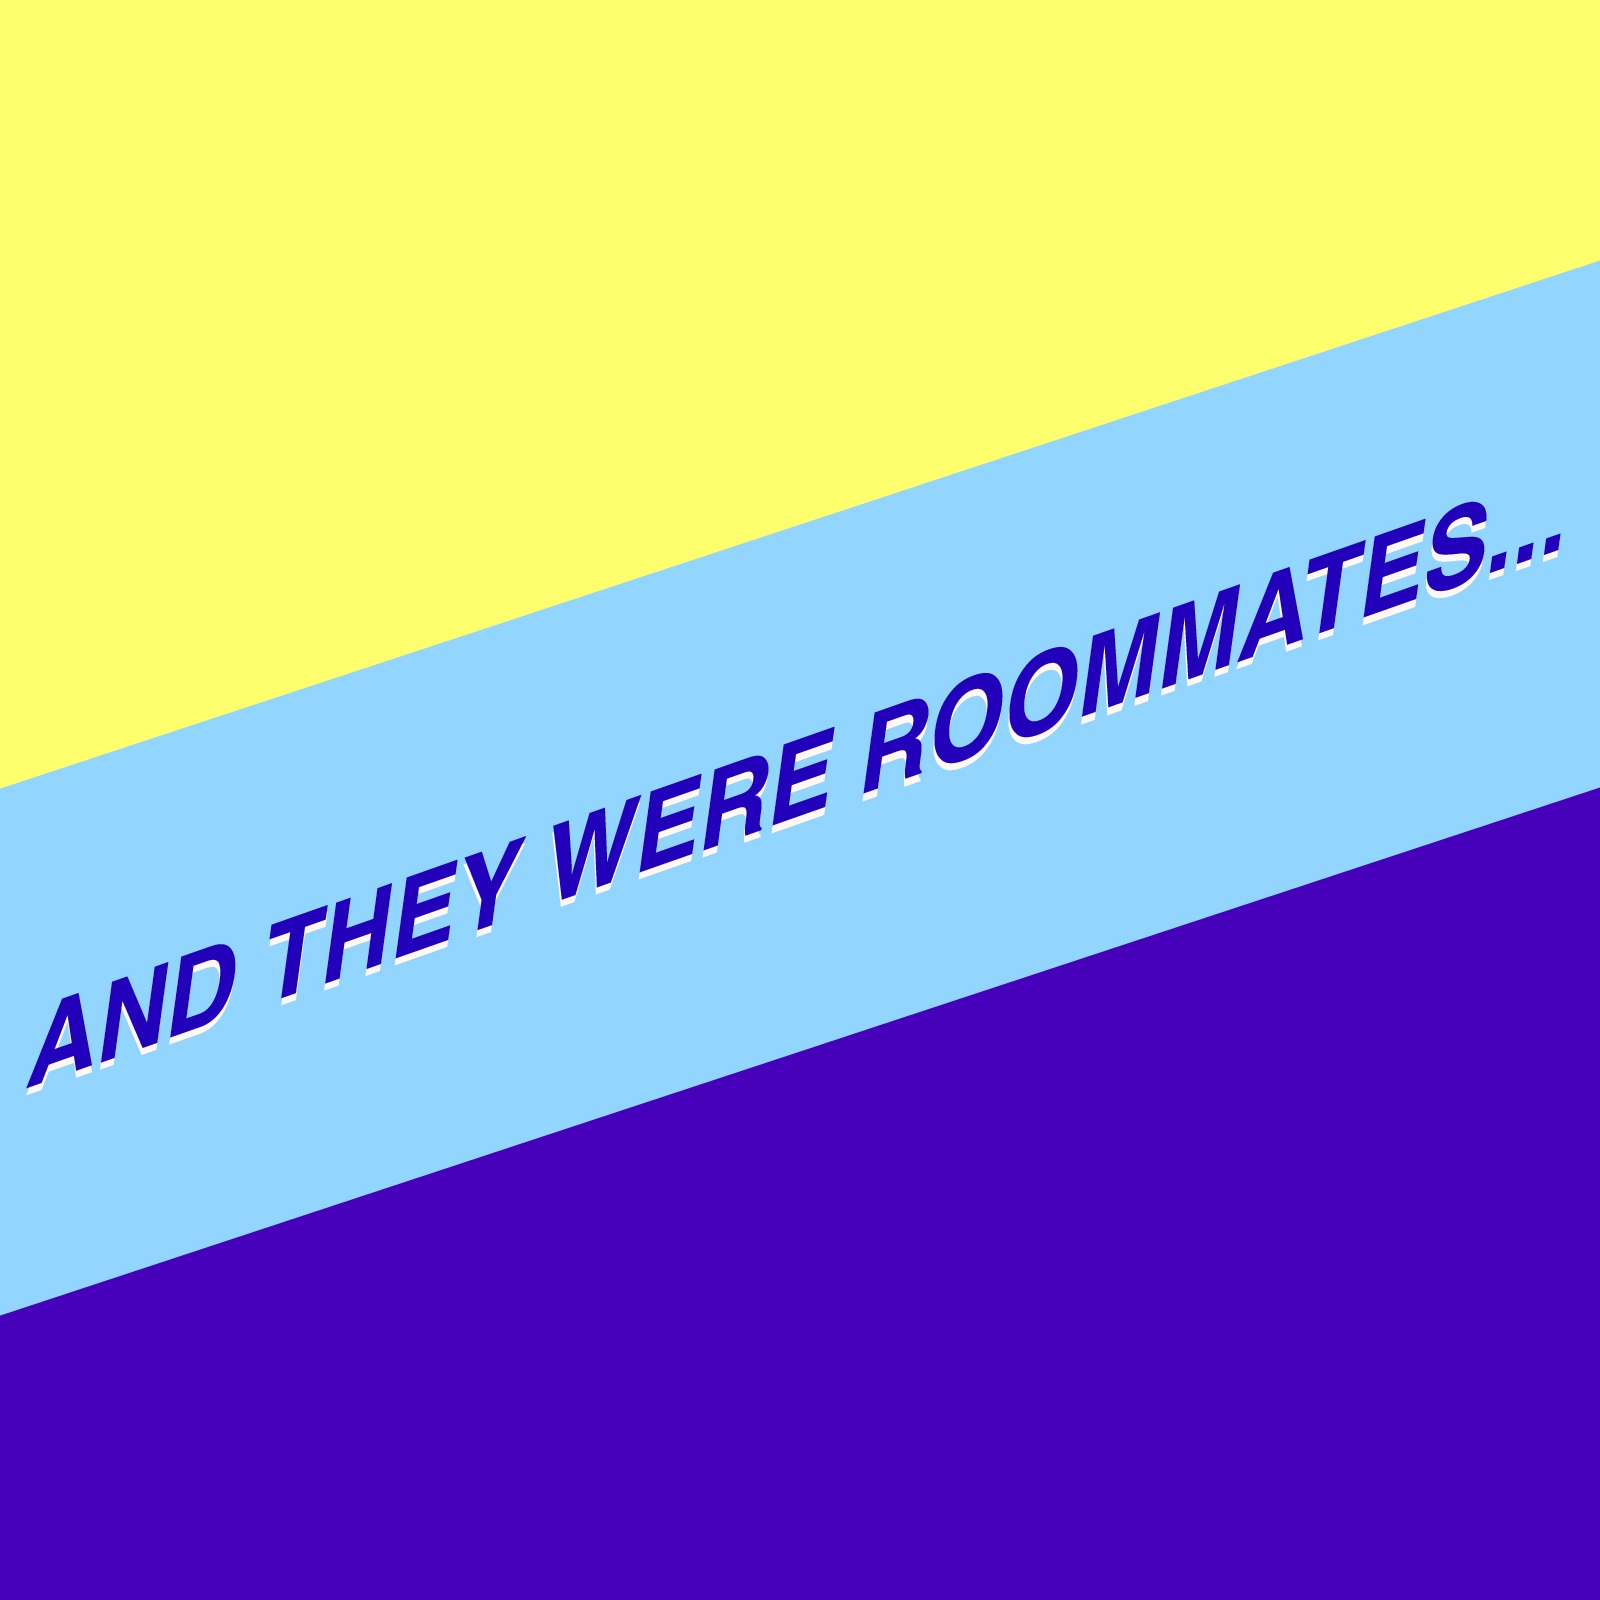 And They Were Roommates… Episode 1: Introduction – WHUS Radio